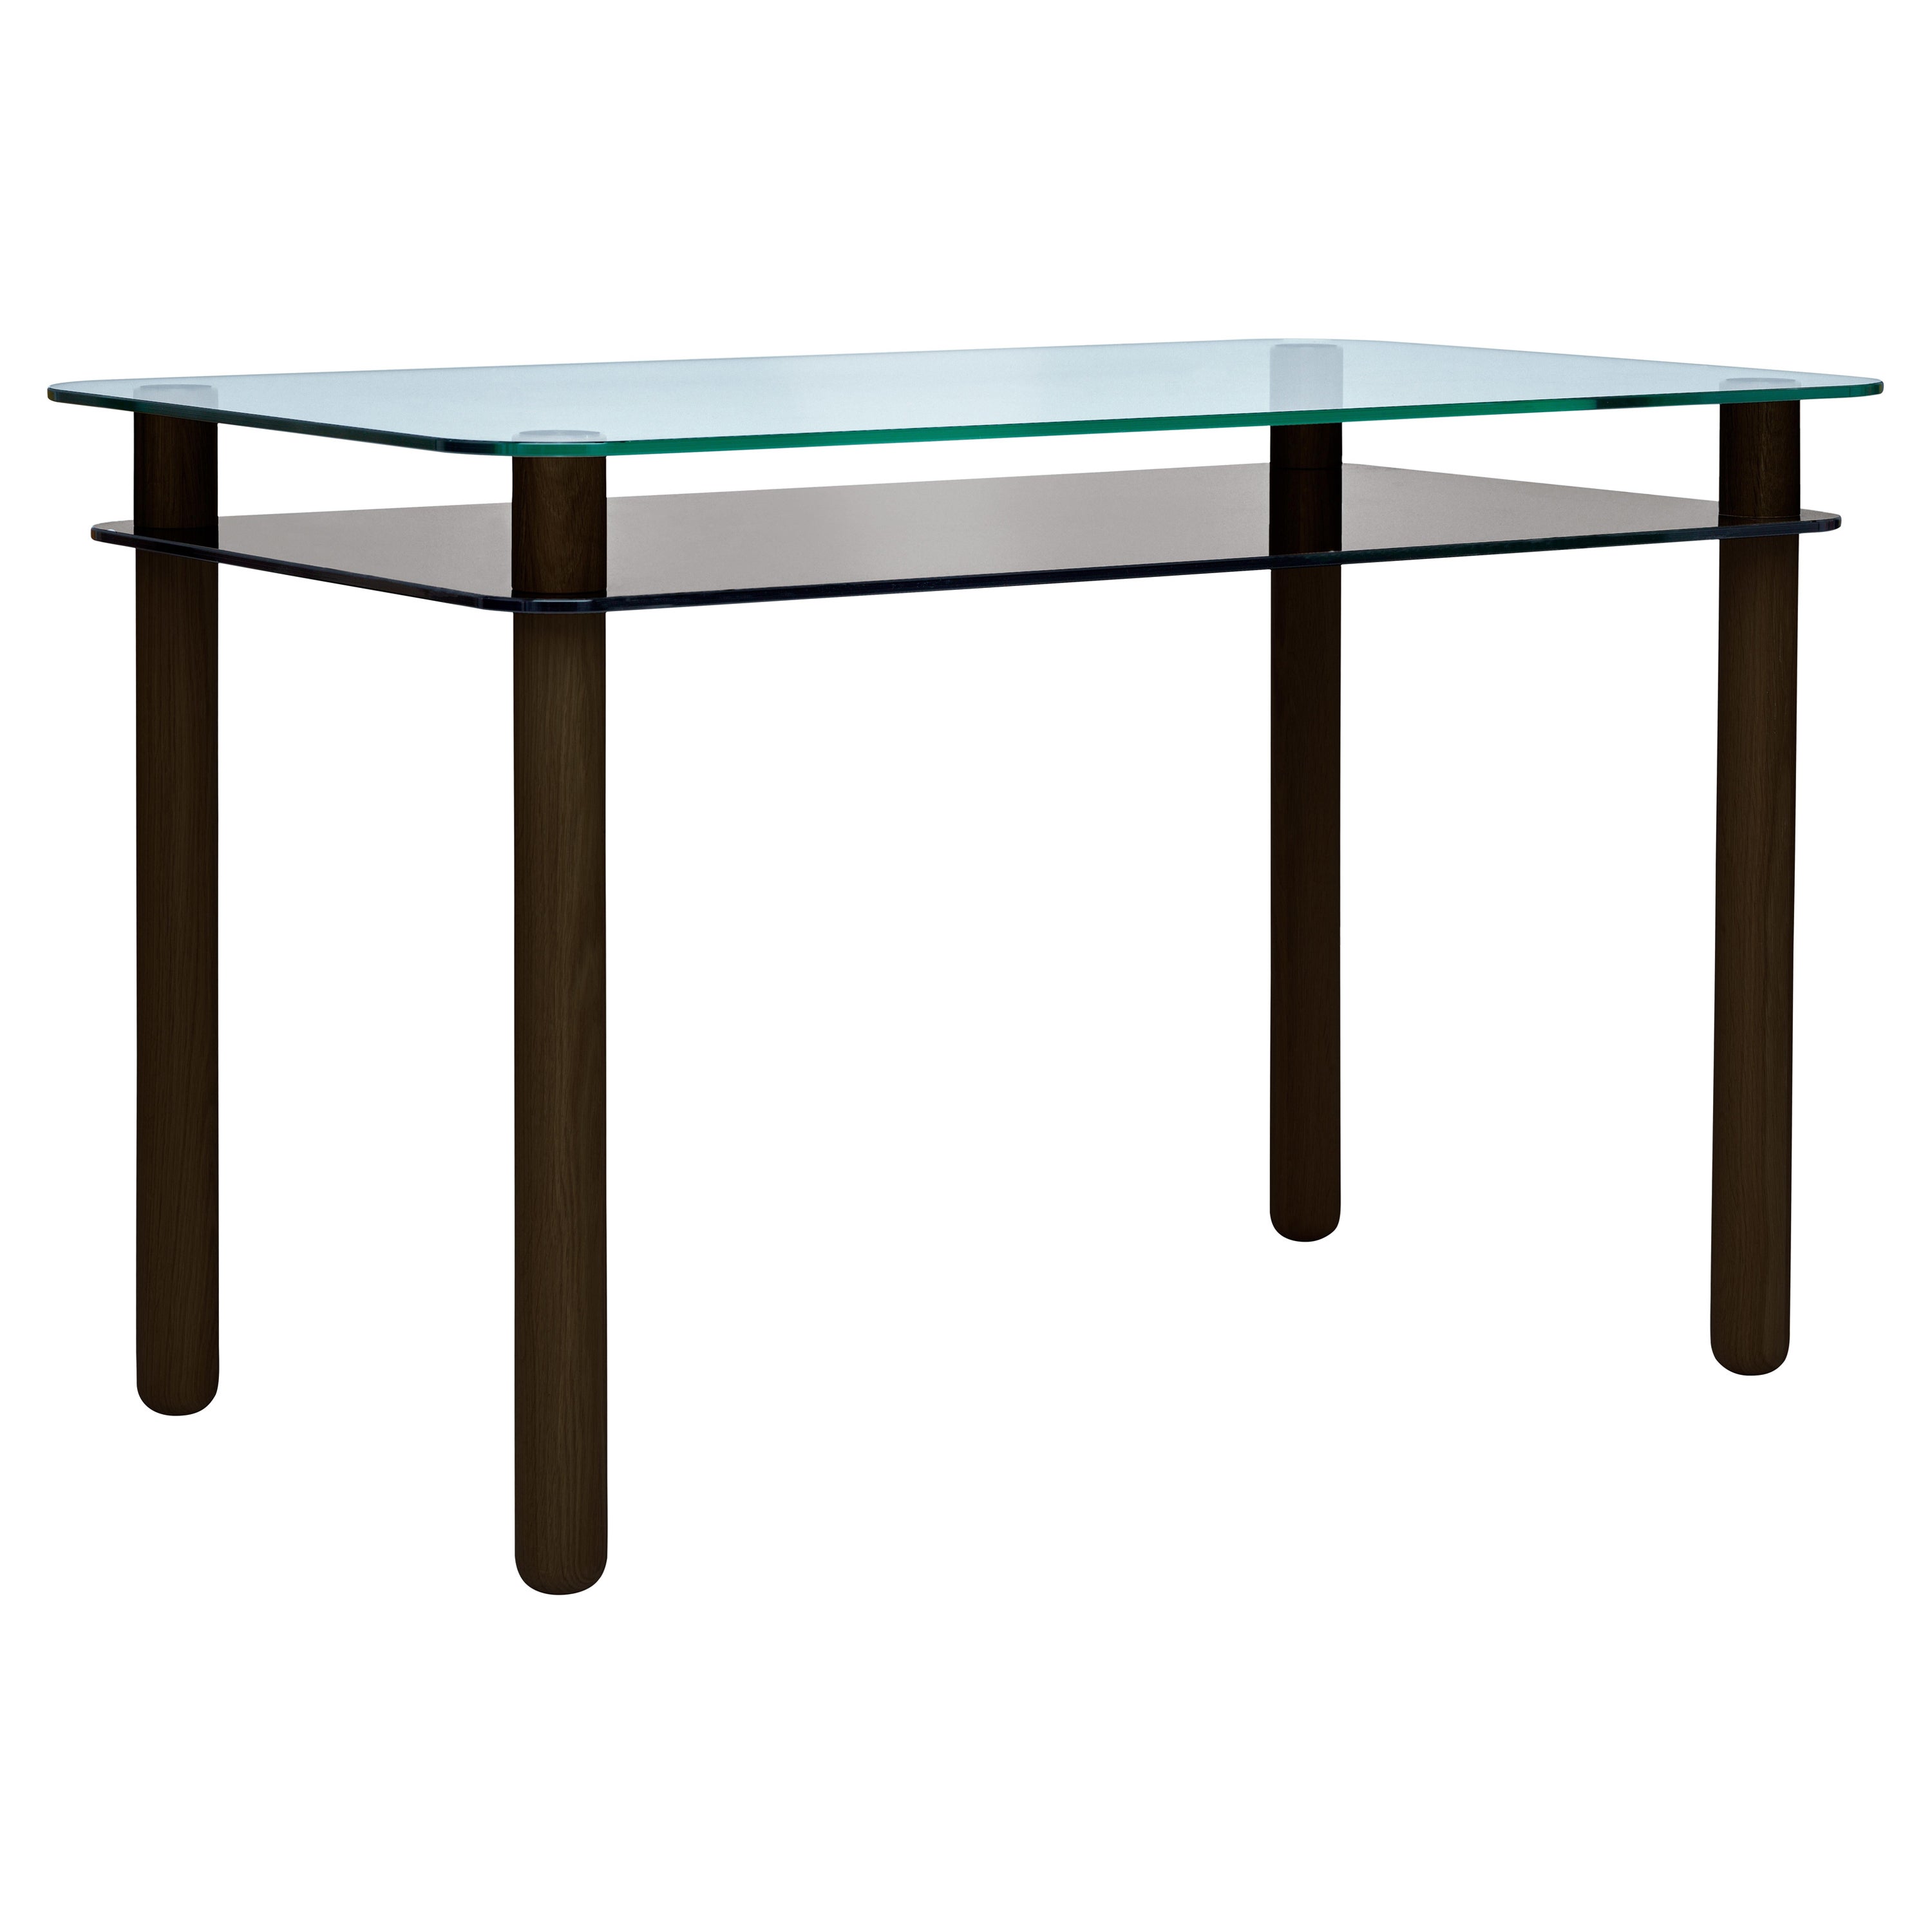 Big Sur Desk by Fogia, Clear & Anthracite Glass , Wenge Legs